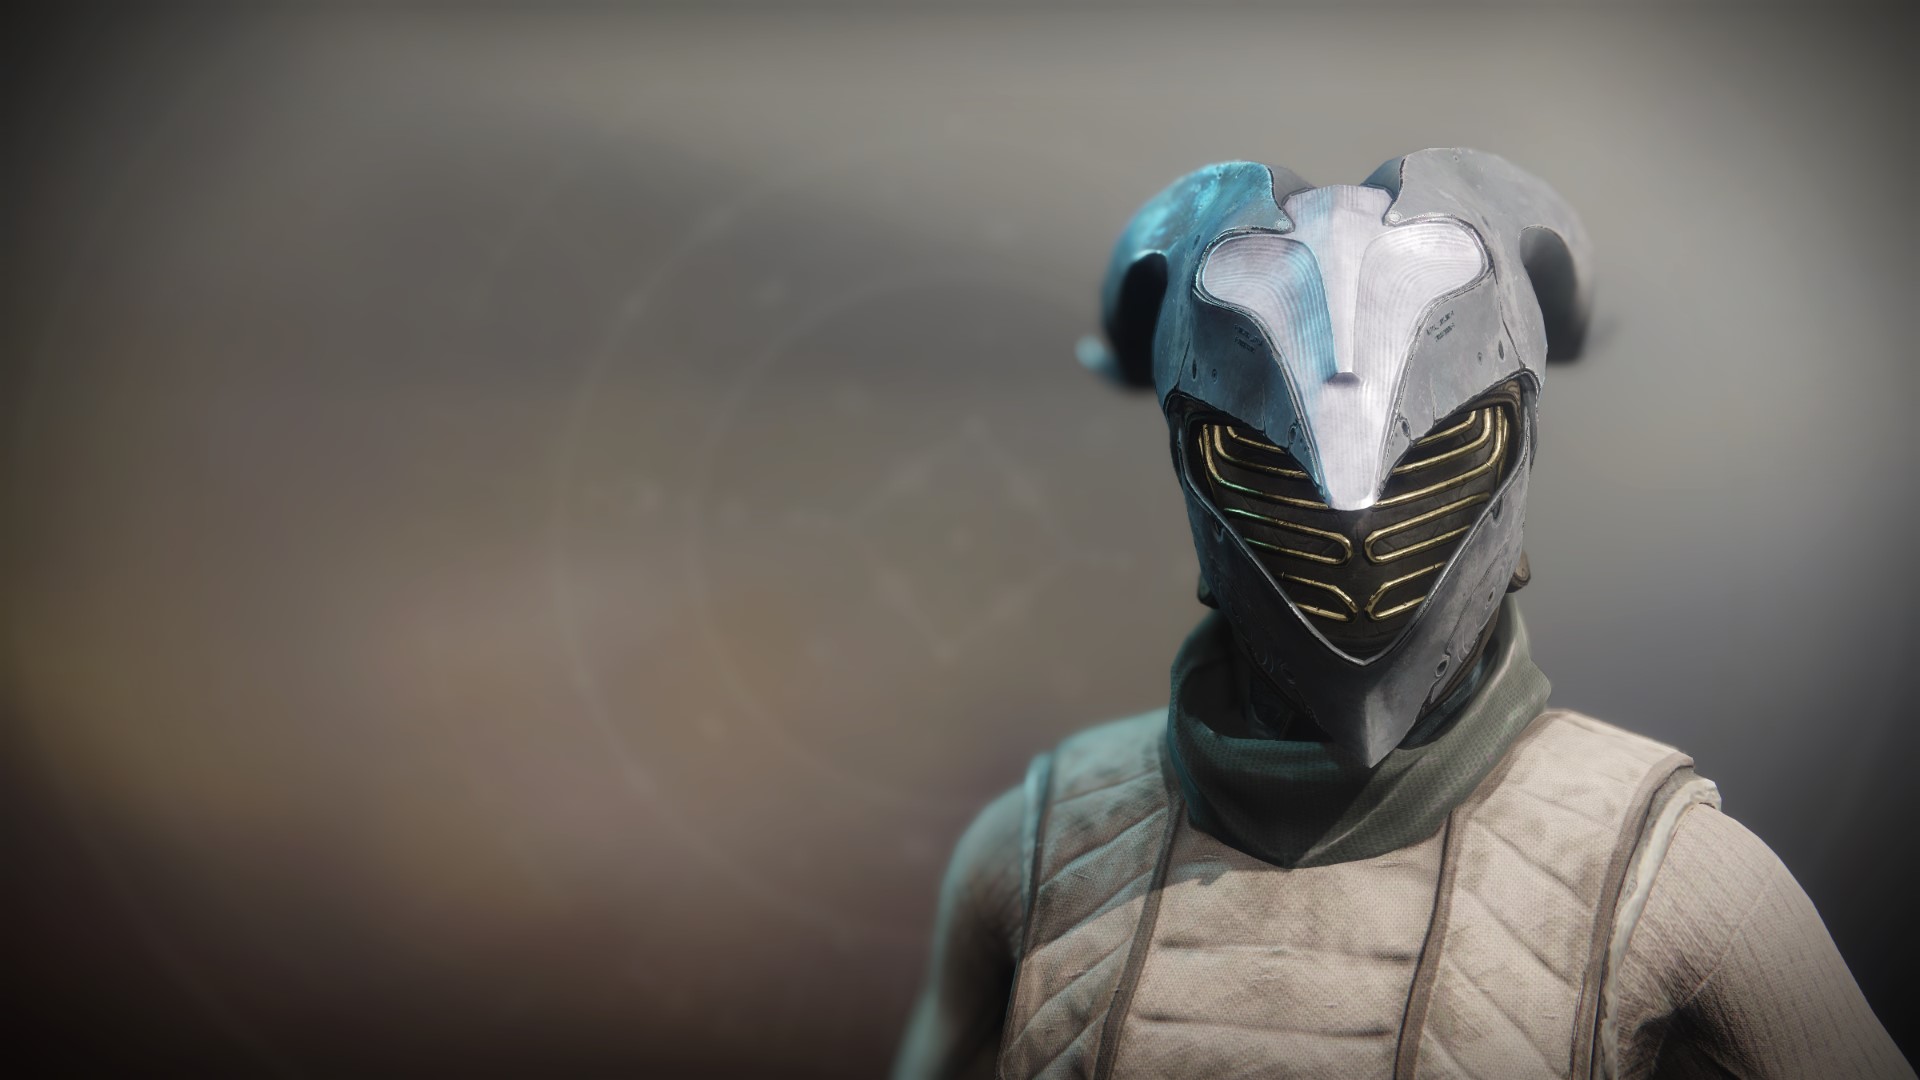 An in-game render of the Felwinter's Helm.